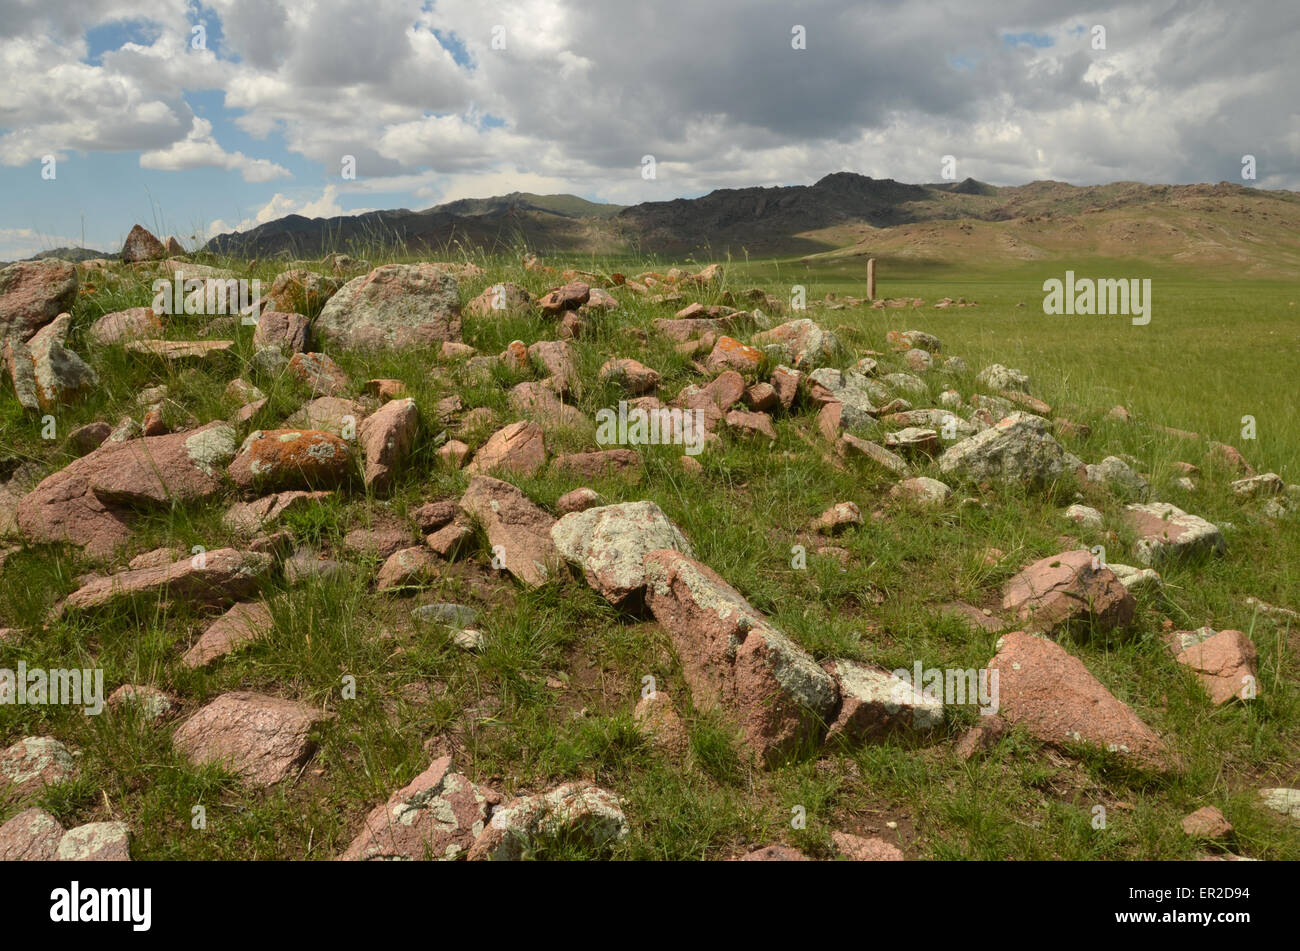 Deer stone and burial mounds near the city of Moron, Ovsgol province, northern Mongolia. Stock Photo